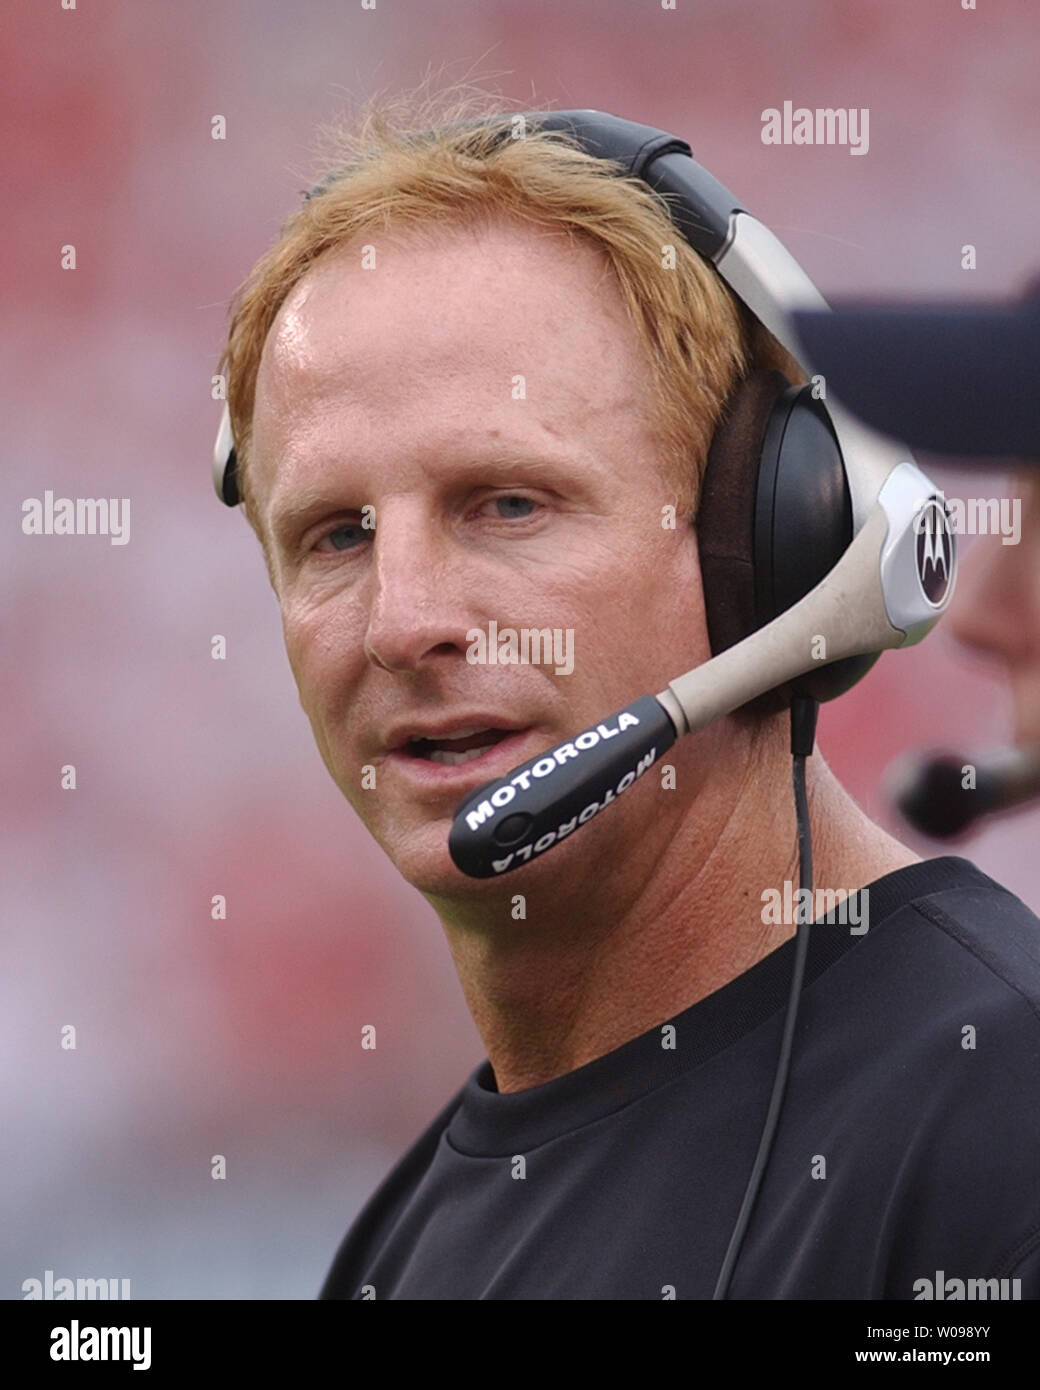 New Orleans Saints' head coach Jim Haslett watches from the sideline during game against the Tampa Bay Buccaneers at Raymond James Stadium January 1, 2006 in Tampa, Fl. The Buccaneers beat the Saints 27-13 and are NFC South Division Champions.  (UPI Photo/Cathy Kapulka) Stock Photo